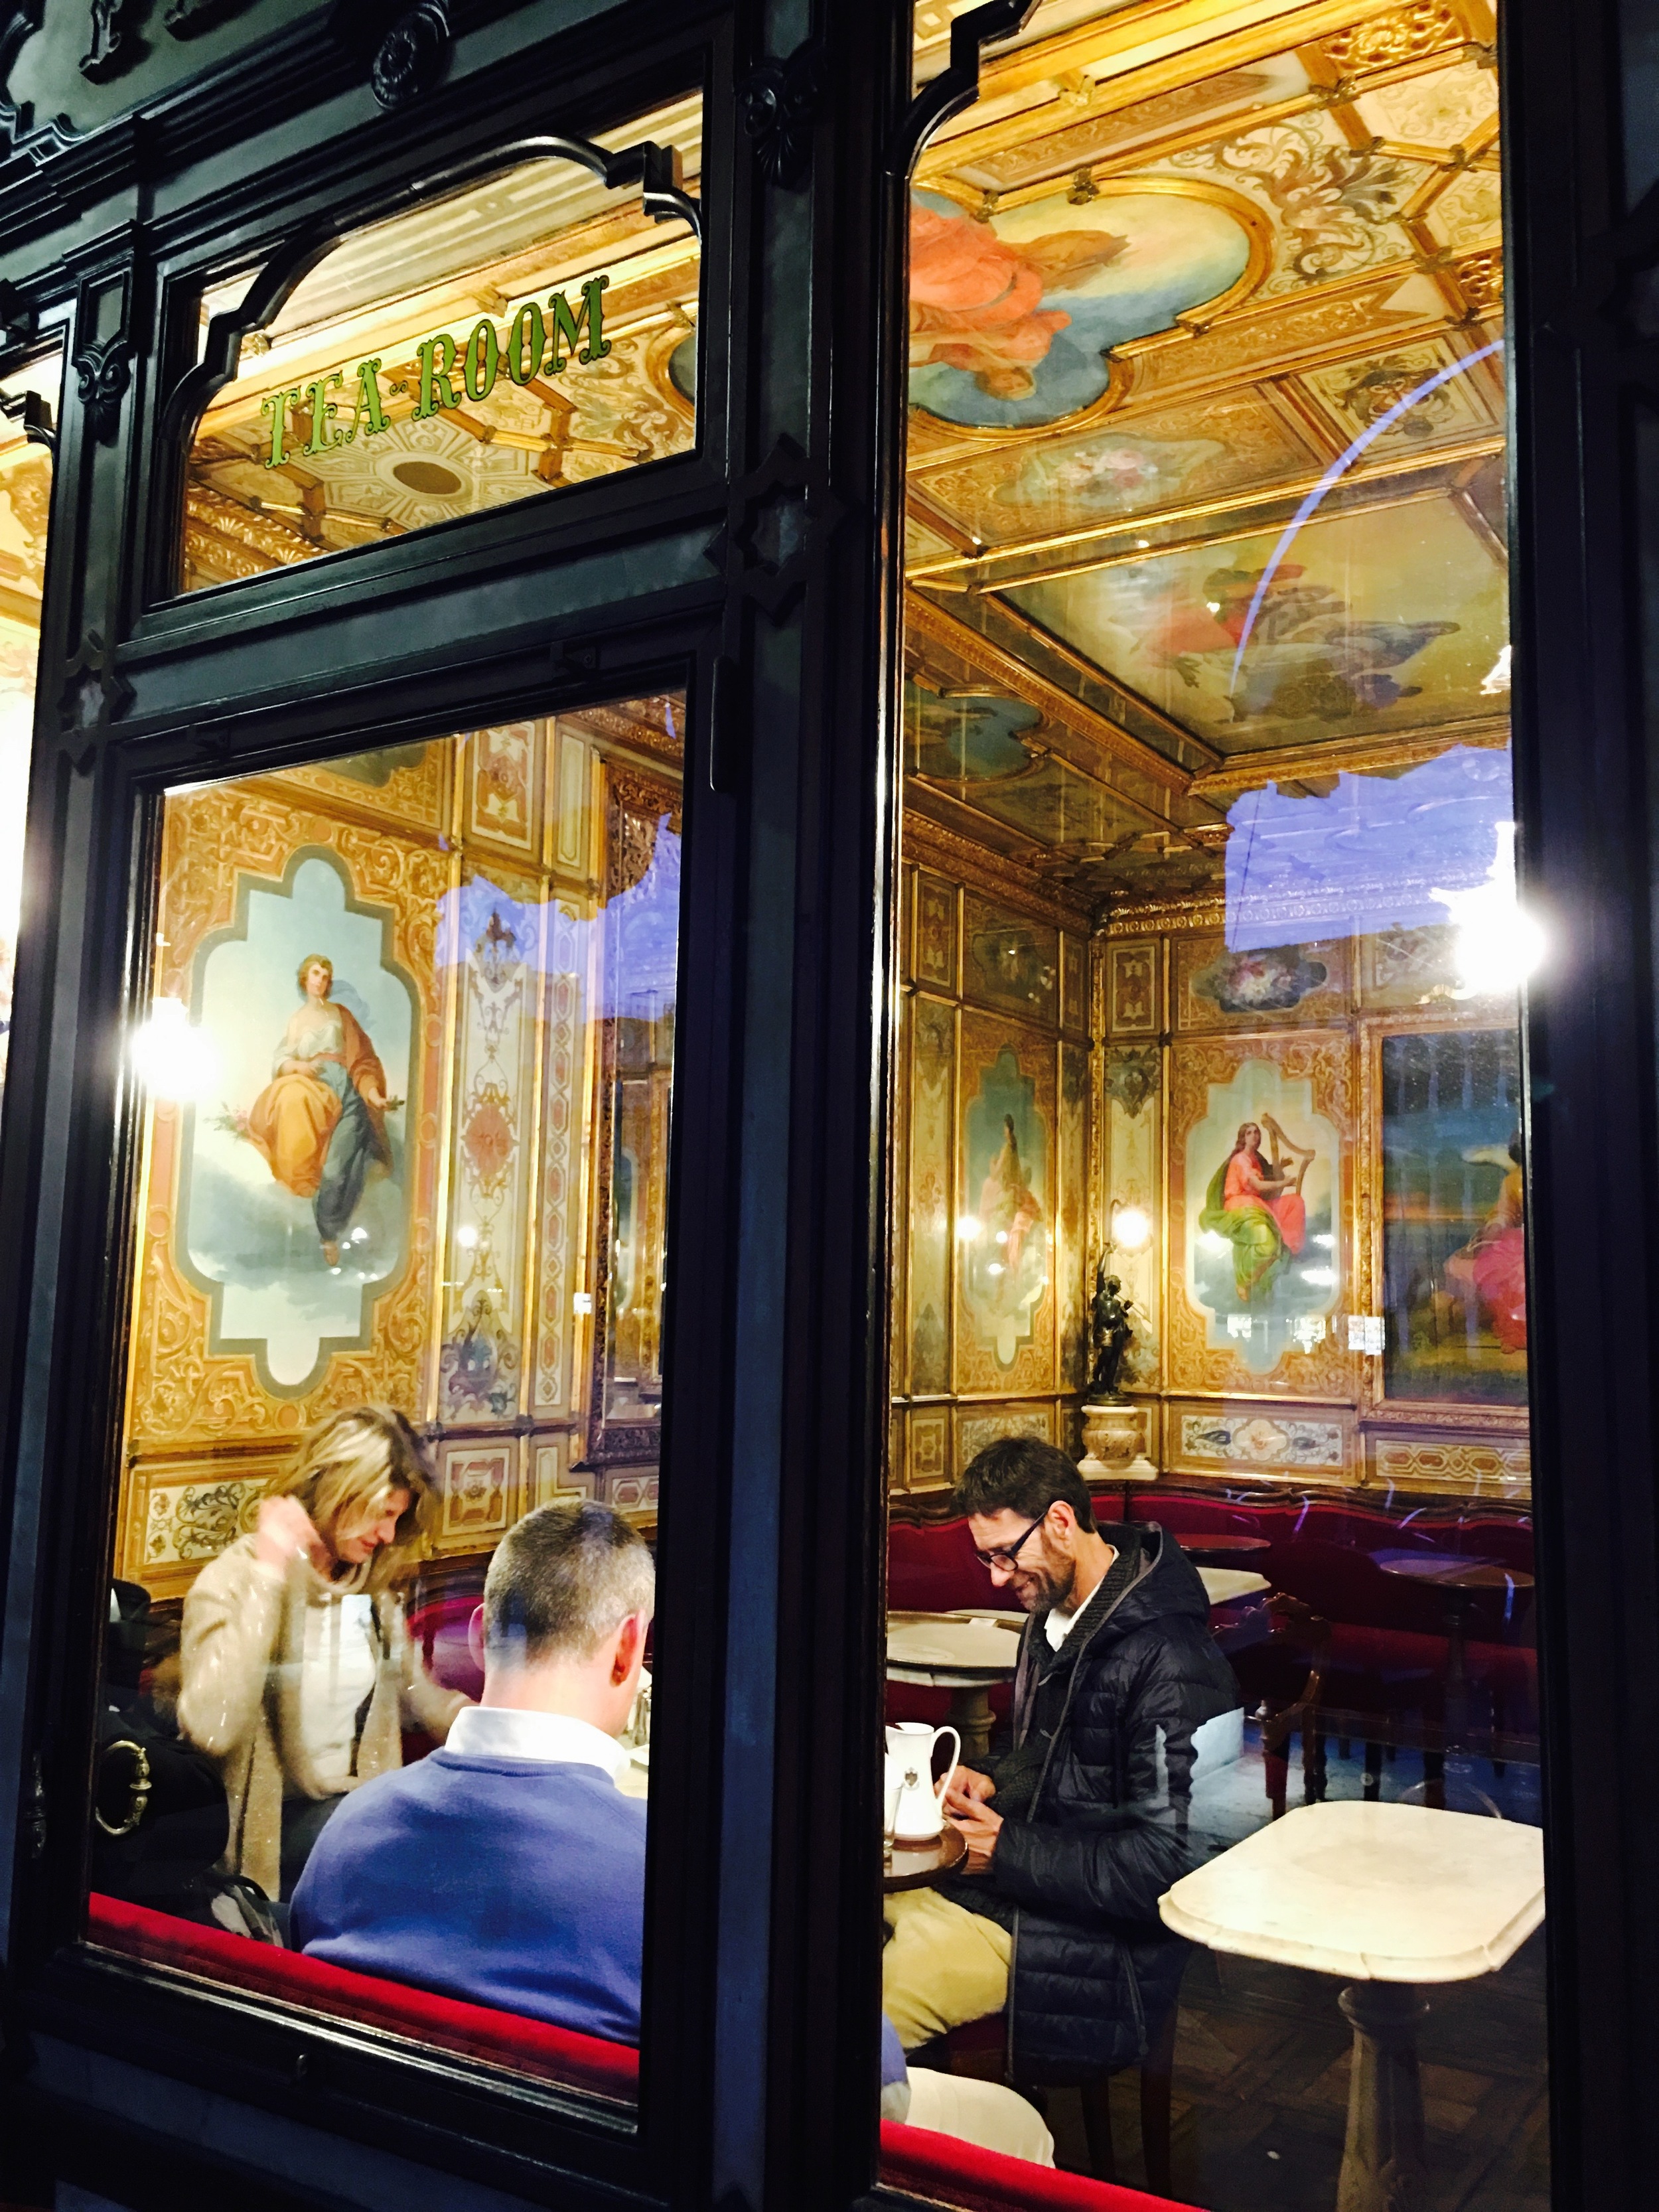  Gloriously expensive coffees and biscuits at the Cafe Florian. I humbly submit the idea that history can be made wherever you are; assuming you are capable of it. Momentous acts don’t need the angel dust of history to anoint it. That aside, the food